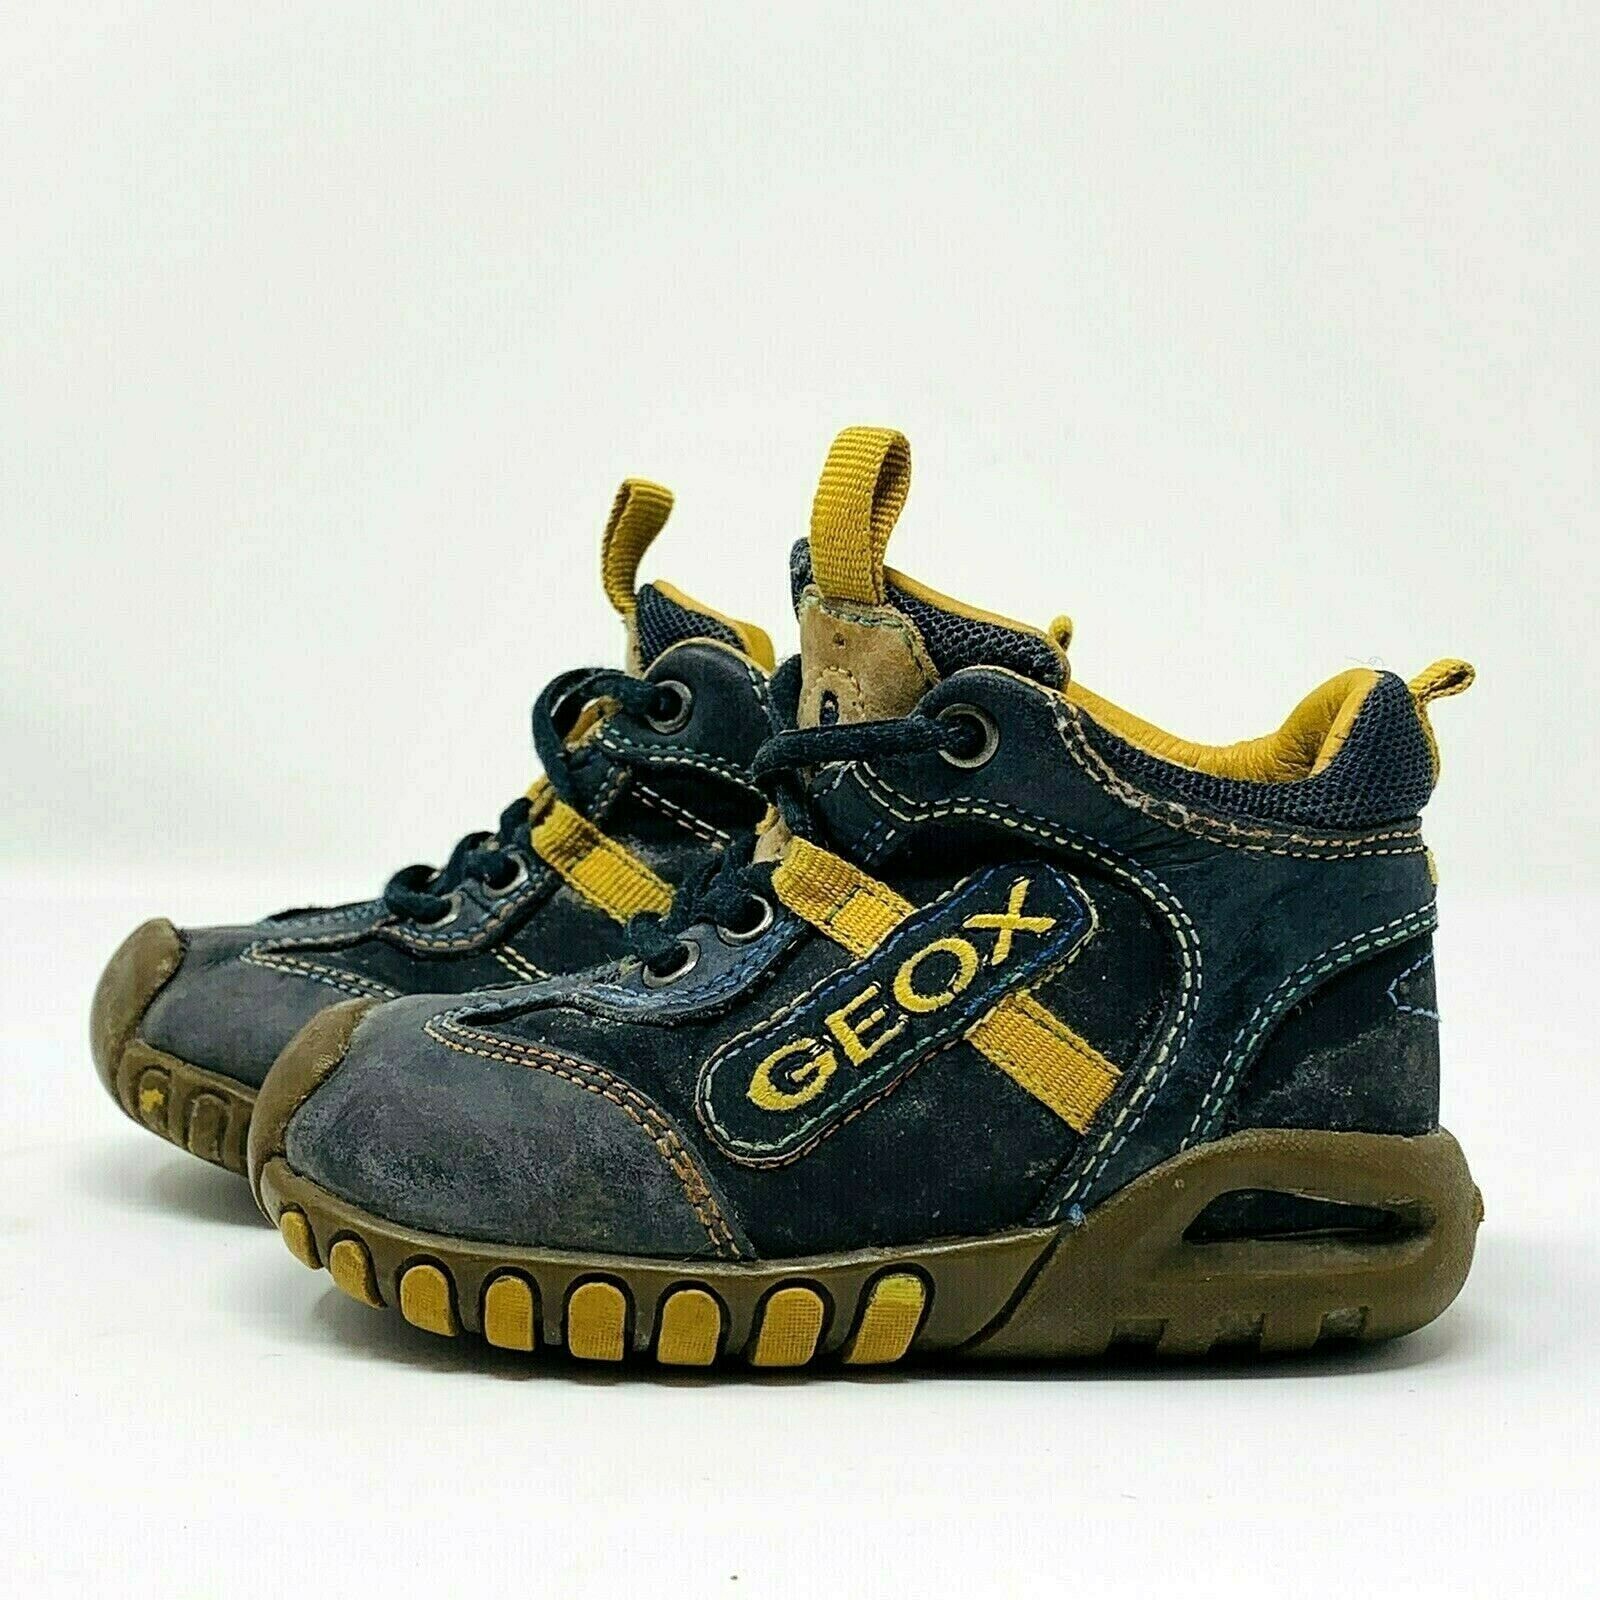 Geox Boys Sz US 4 1/2 EU 20 UK 3.5 Toddler Walking Shoes Suede Leather Comfy |